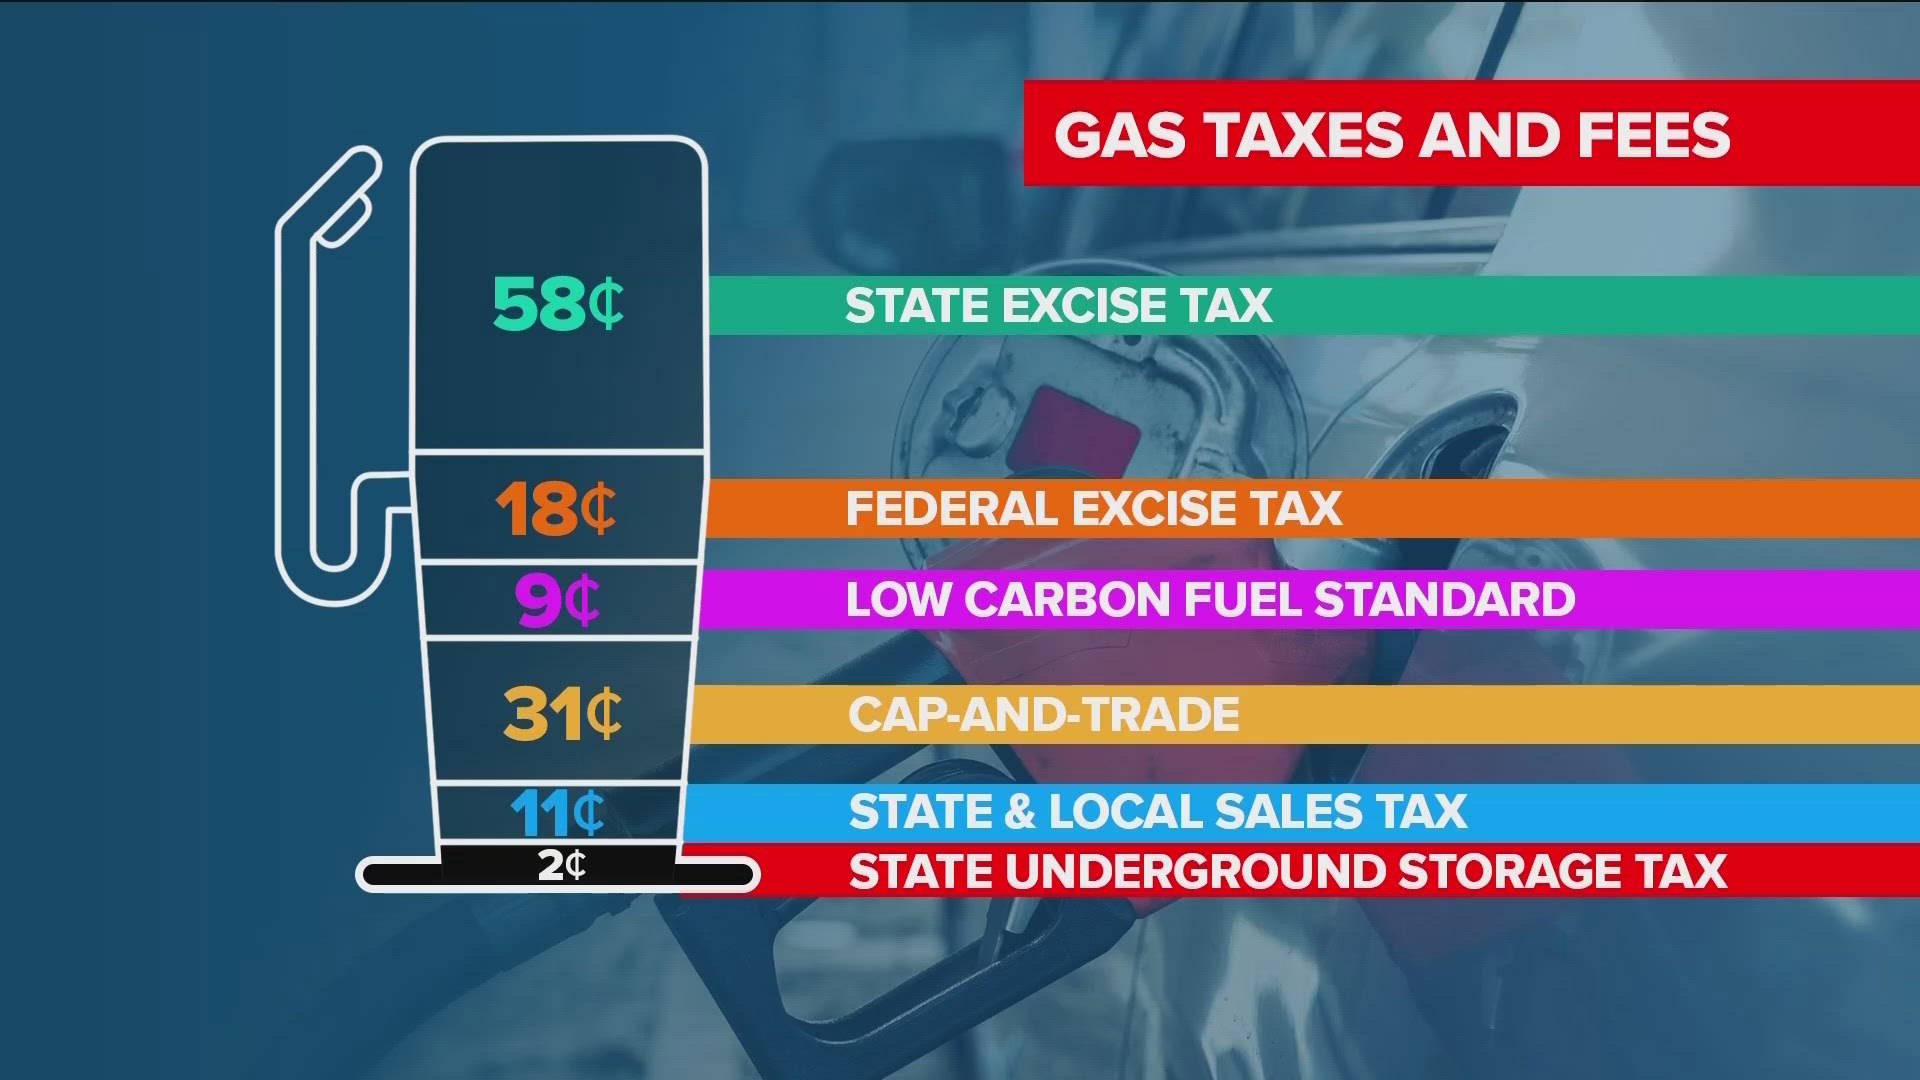 CBS 8 is Working for You to understand the taxes and fees we pay for at the pump and what the money goes toward.